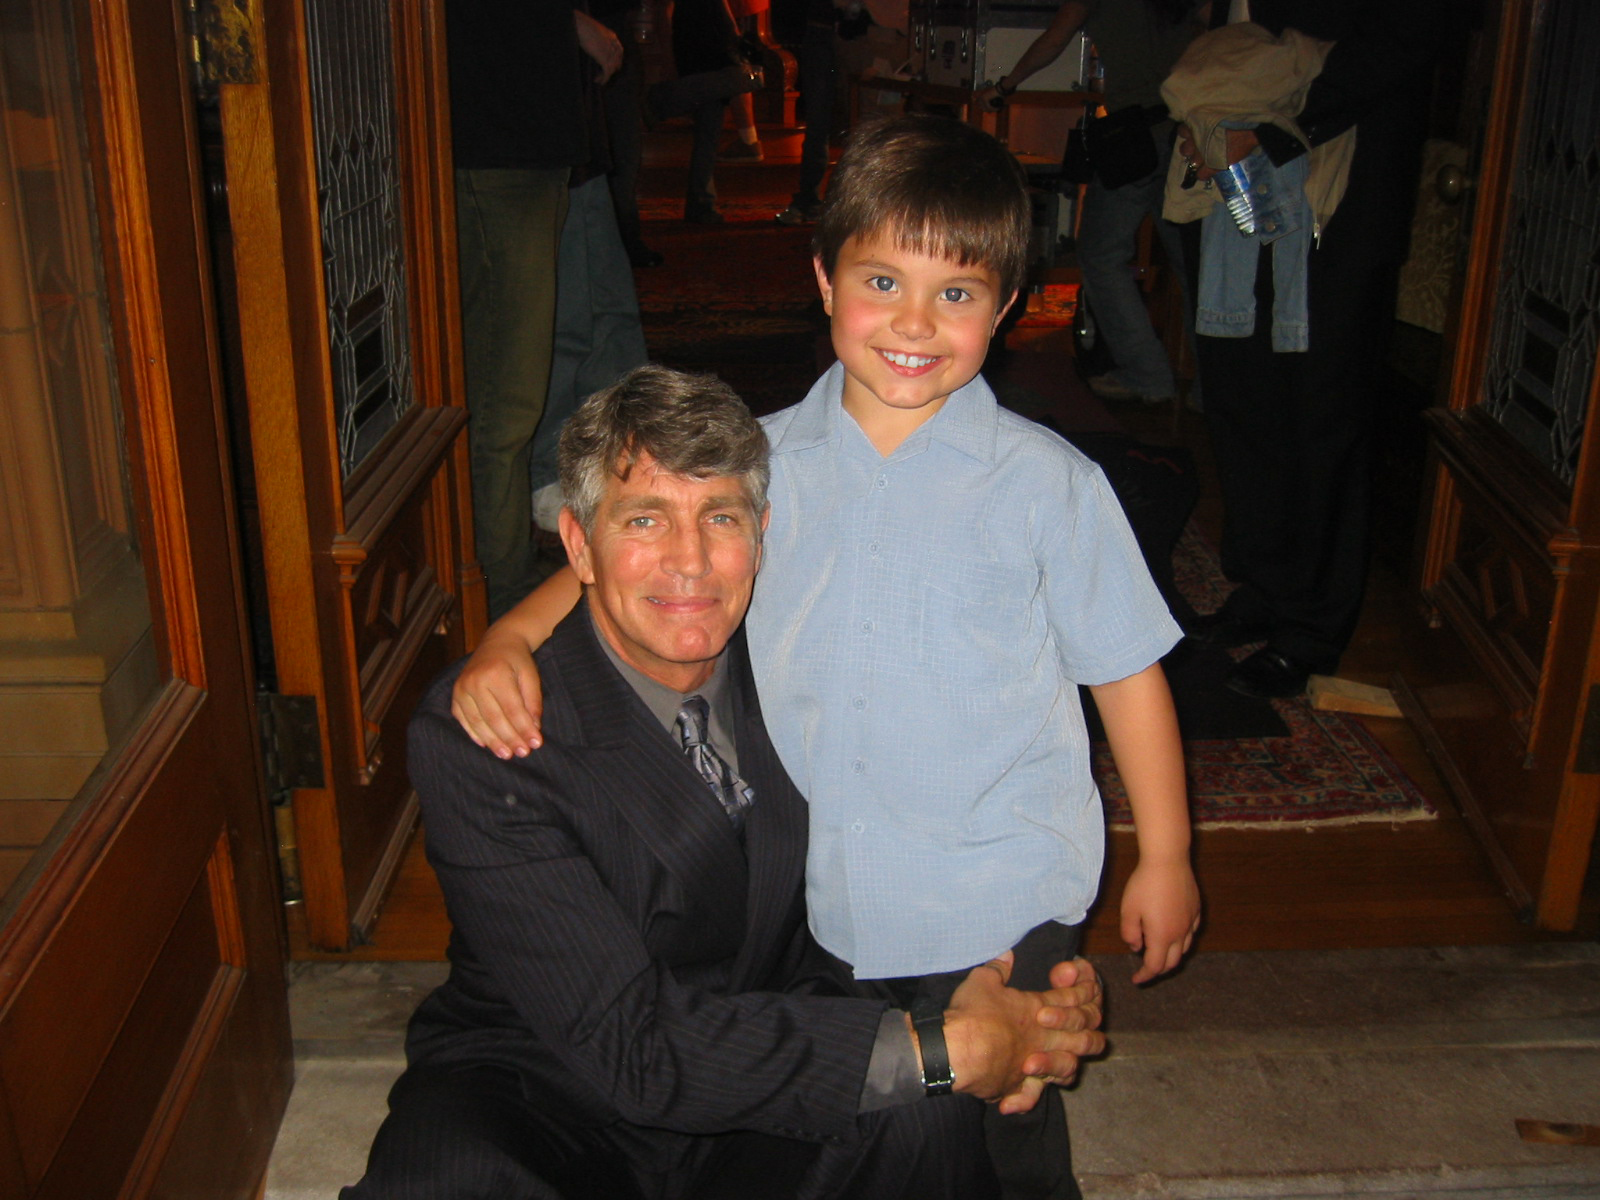 Zach with Eric Roberts on the set of 